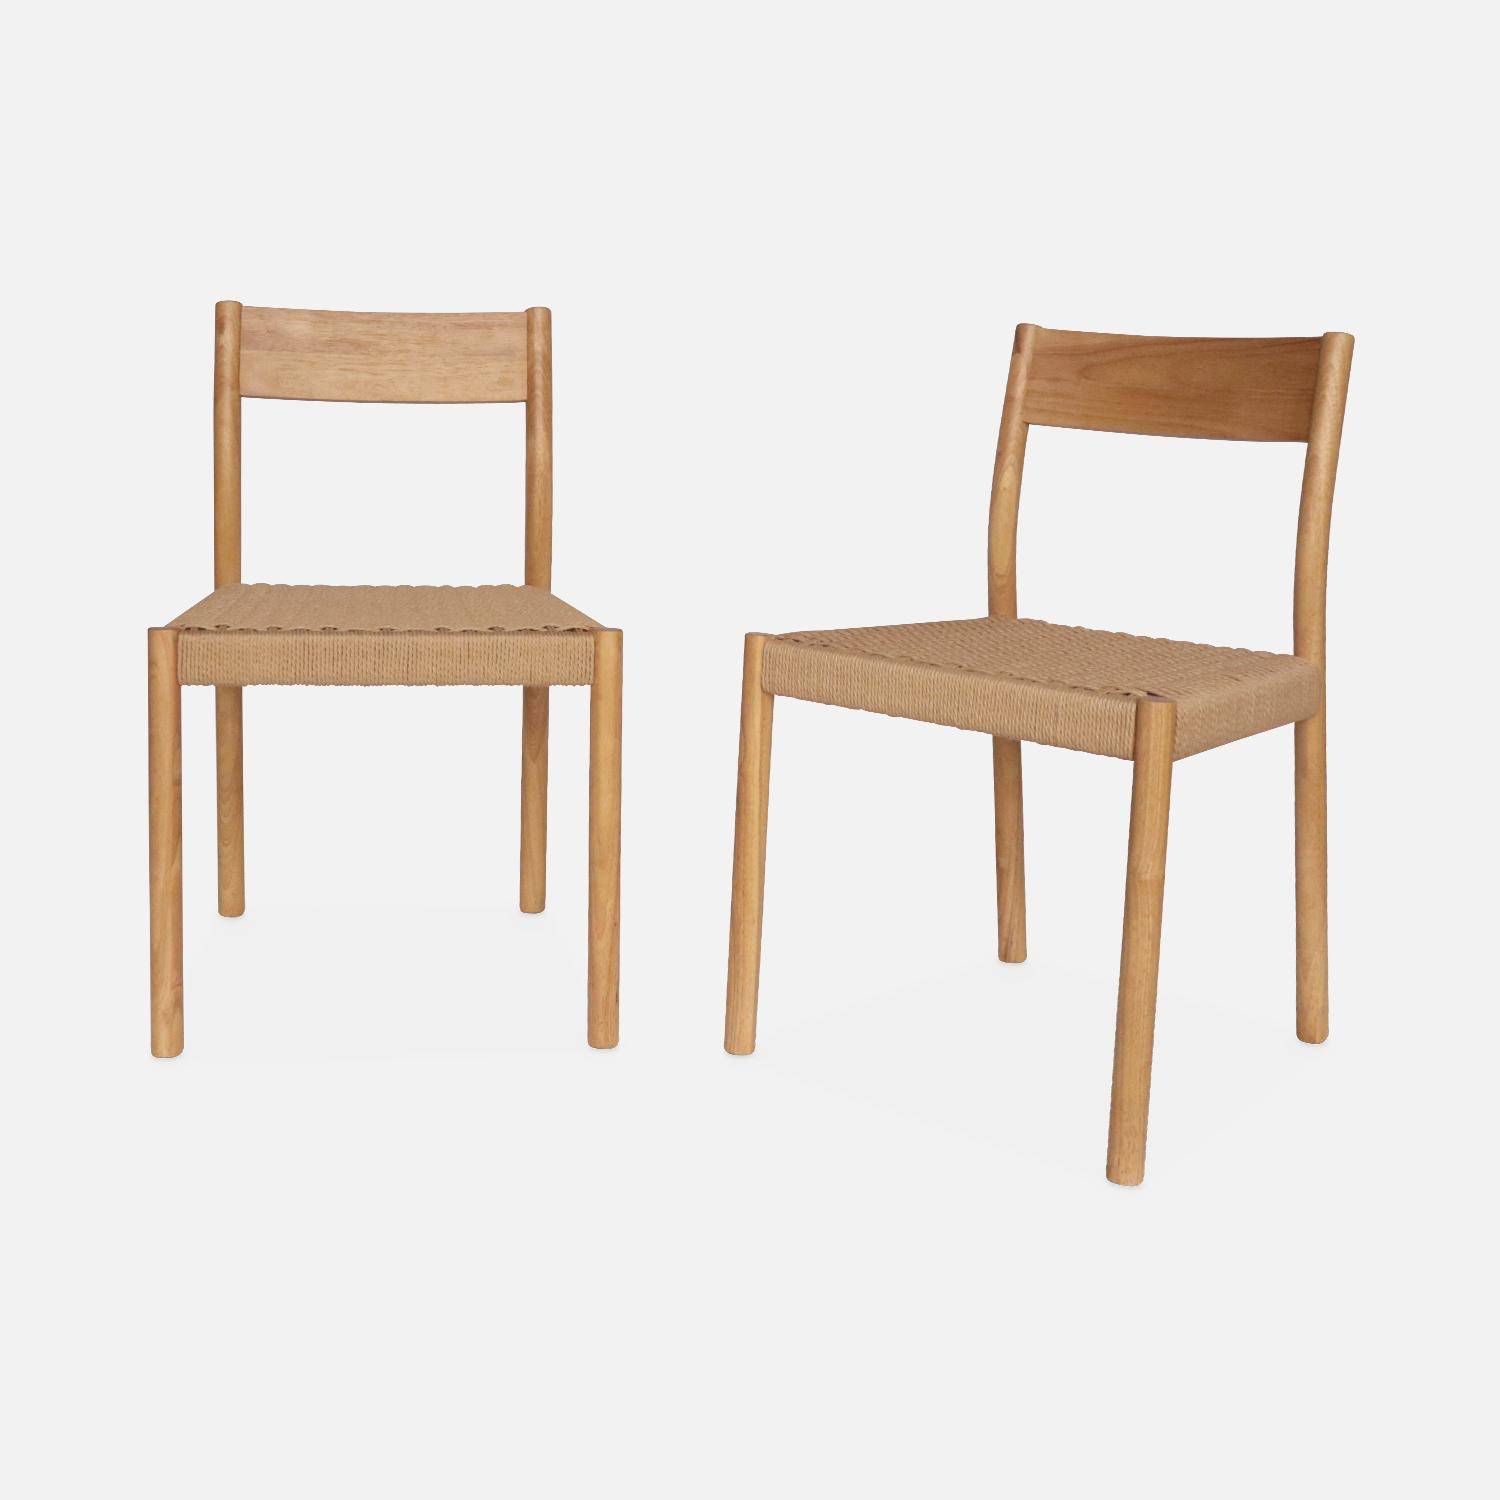 Pair of timeless design Wood and Rope Dining Room chairs, natural,  L49.5 x W53 x H82 cm,sweeek,Photo4